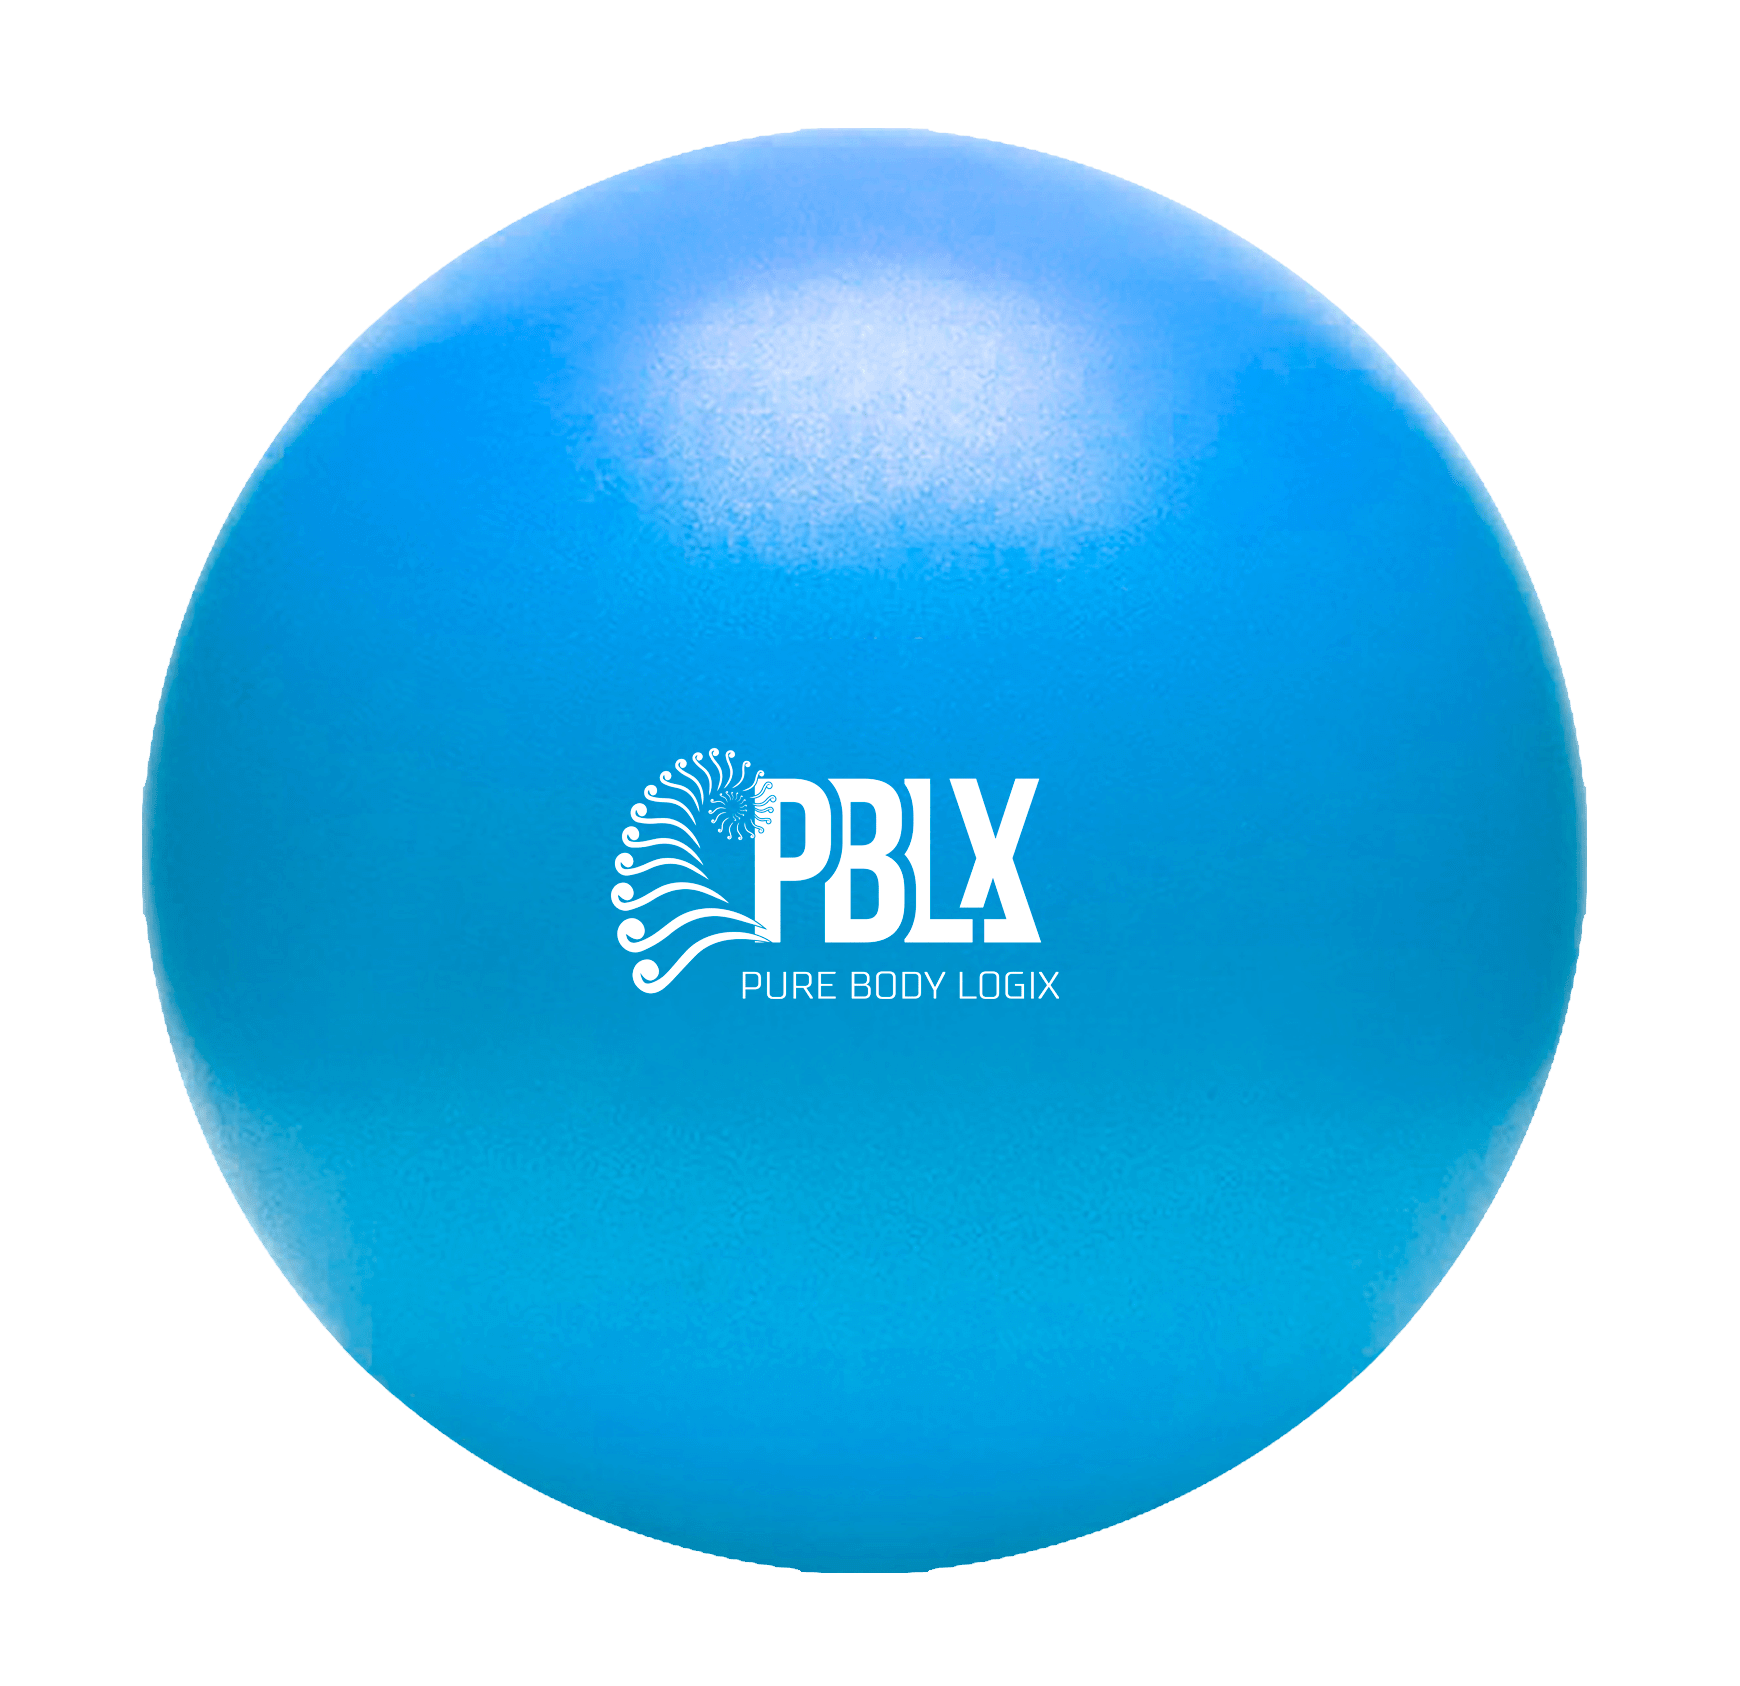 PBLX Yoga & Pilates Exercise Ball - Blue | Strengthen Core Muscles | Improve Balance and Fitness, Goodies N Stuff